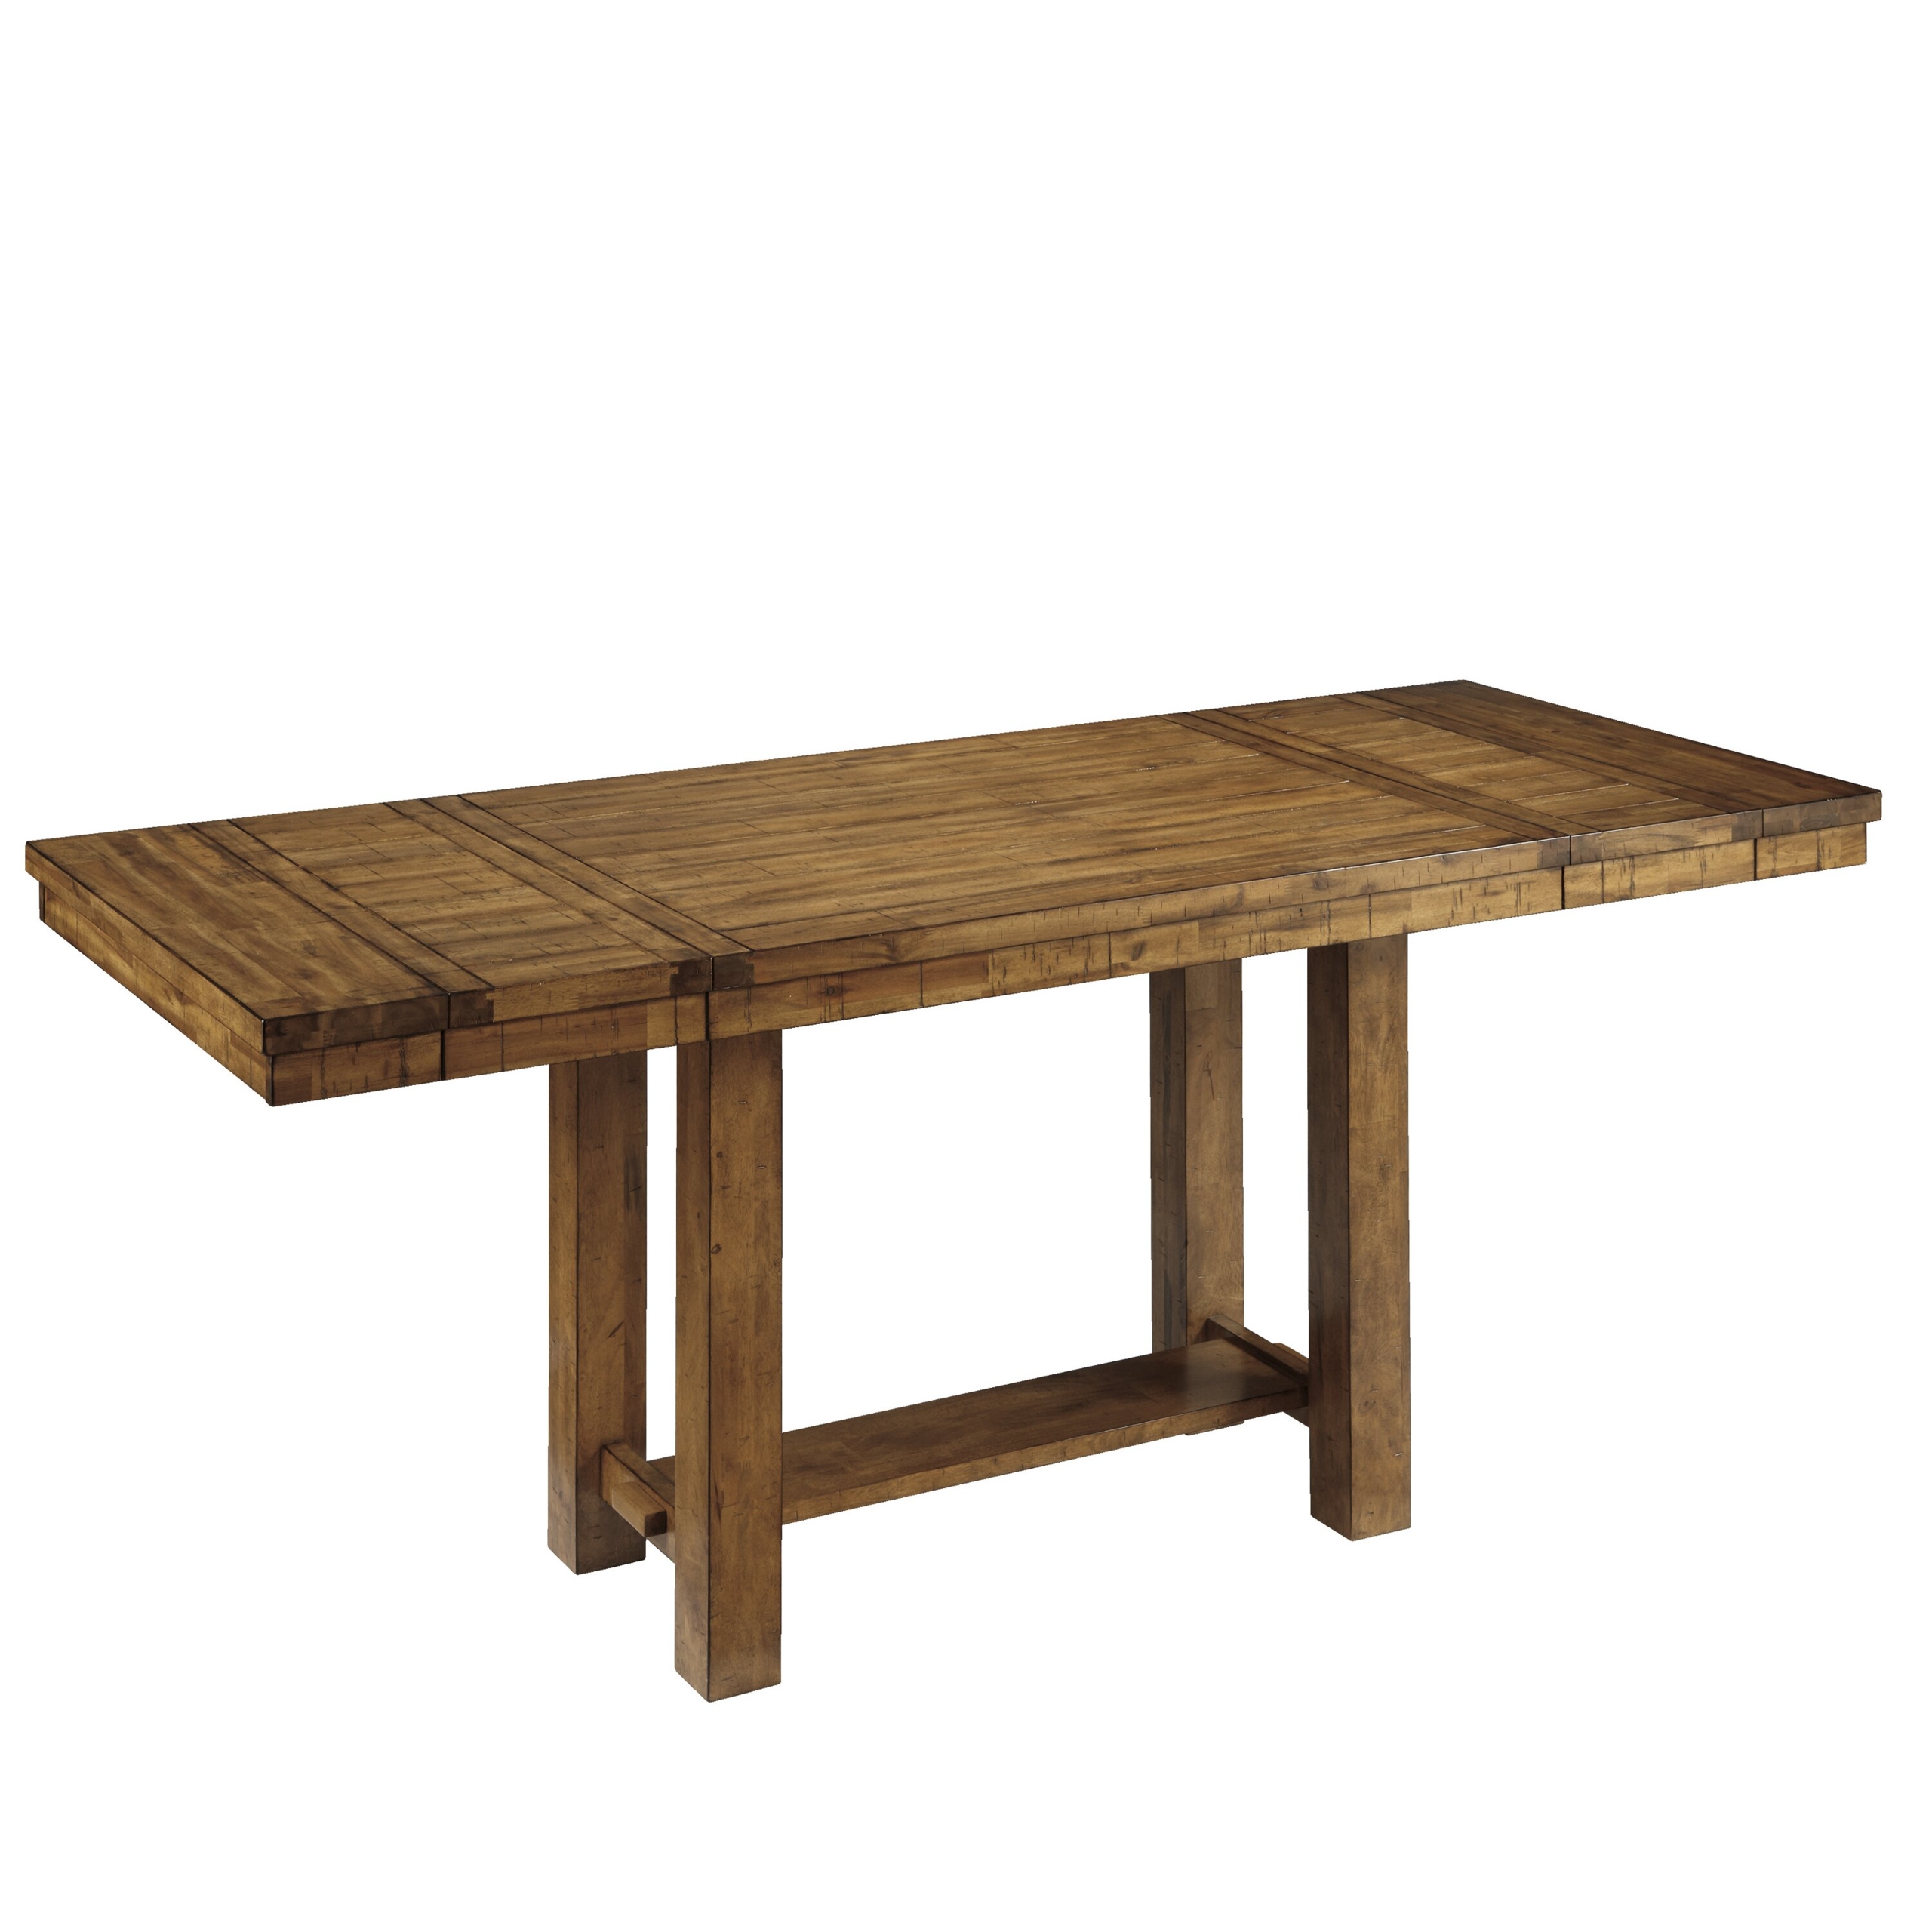 Signature design by ashley rectangular dining room counter extension table